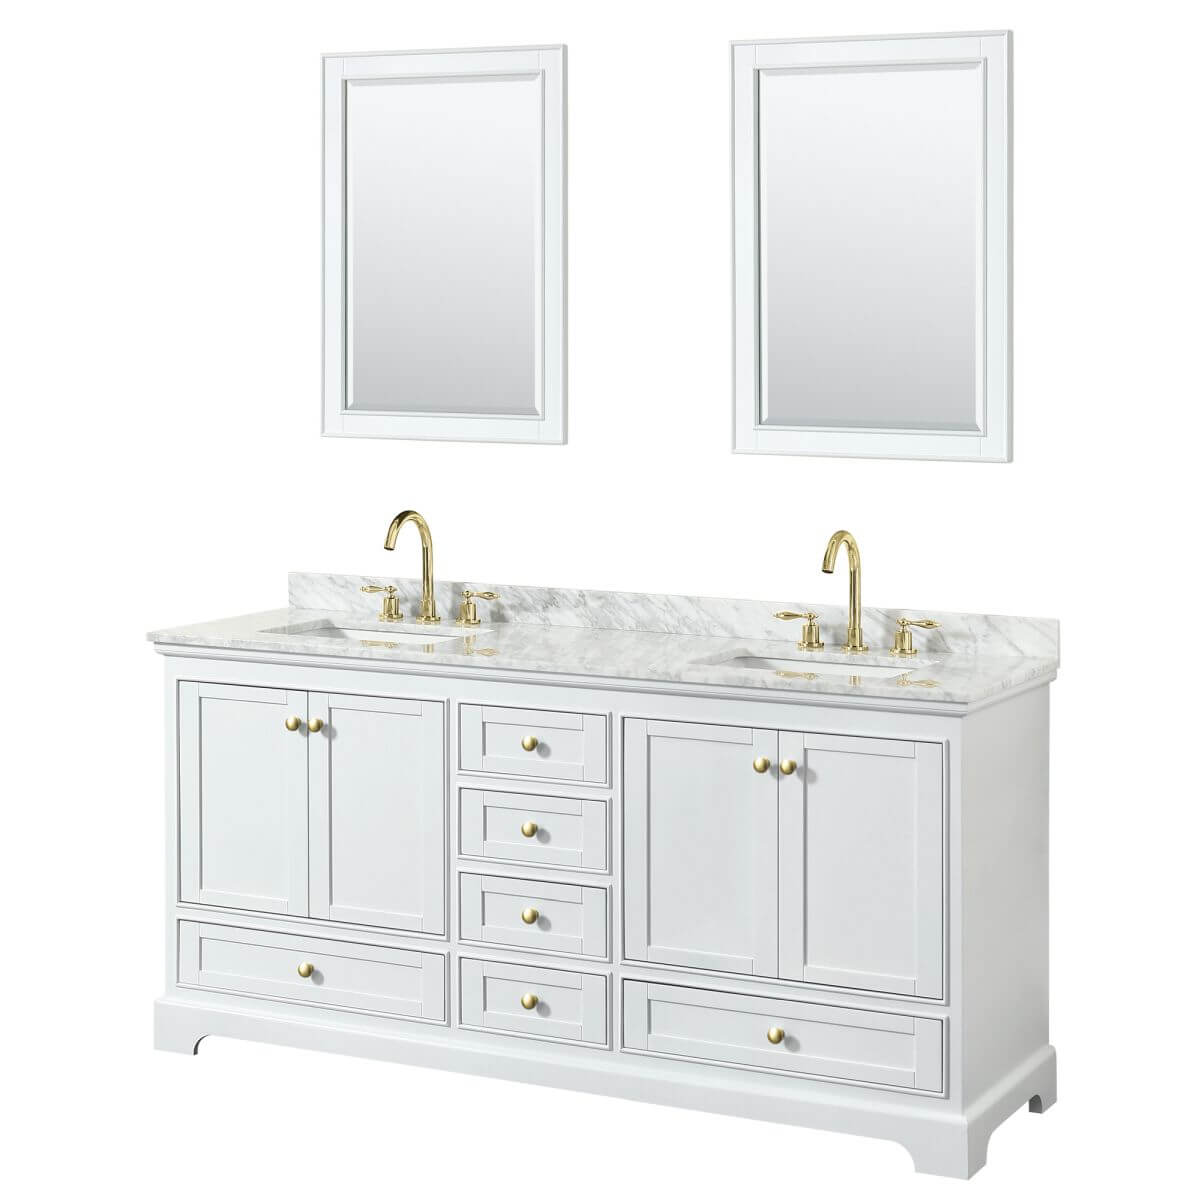 Wyndham Collection Deborah 72 inch Double Bathroom Vanity in White with White Carrara Marble Countertop, Undermount Square Sinks, Brushed Gold Trim and 24 inch Mirrors - WCS202072DWGCMUNSM24